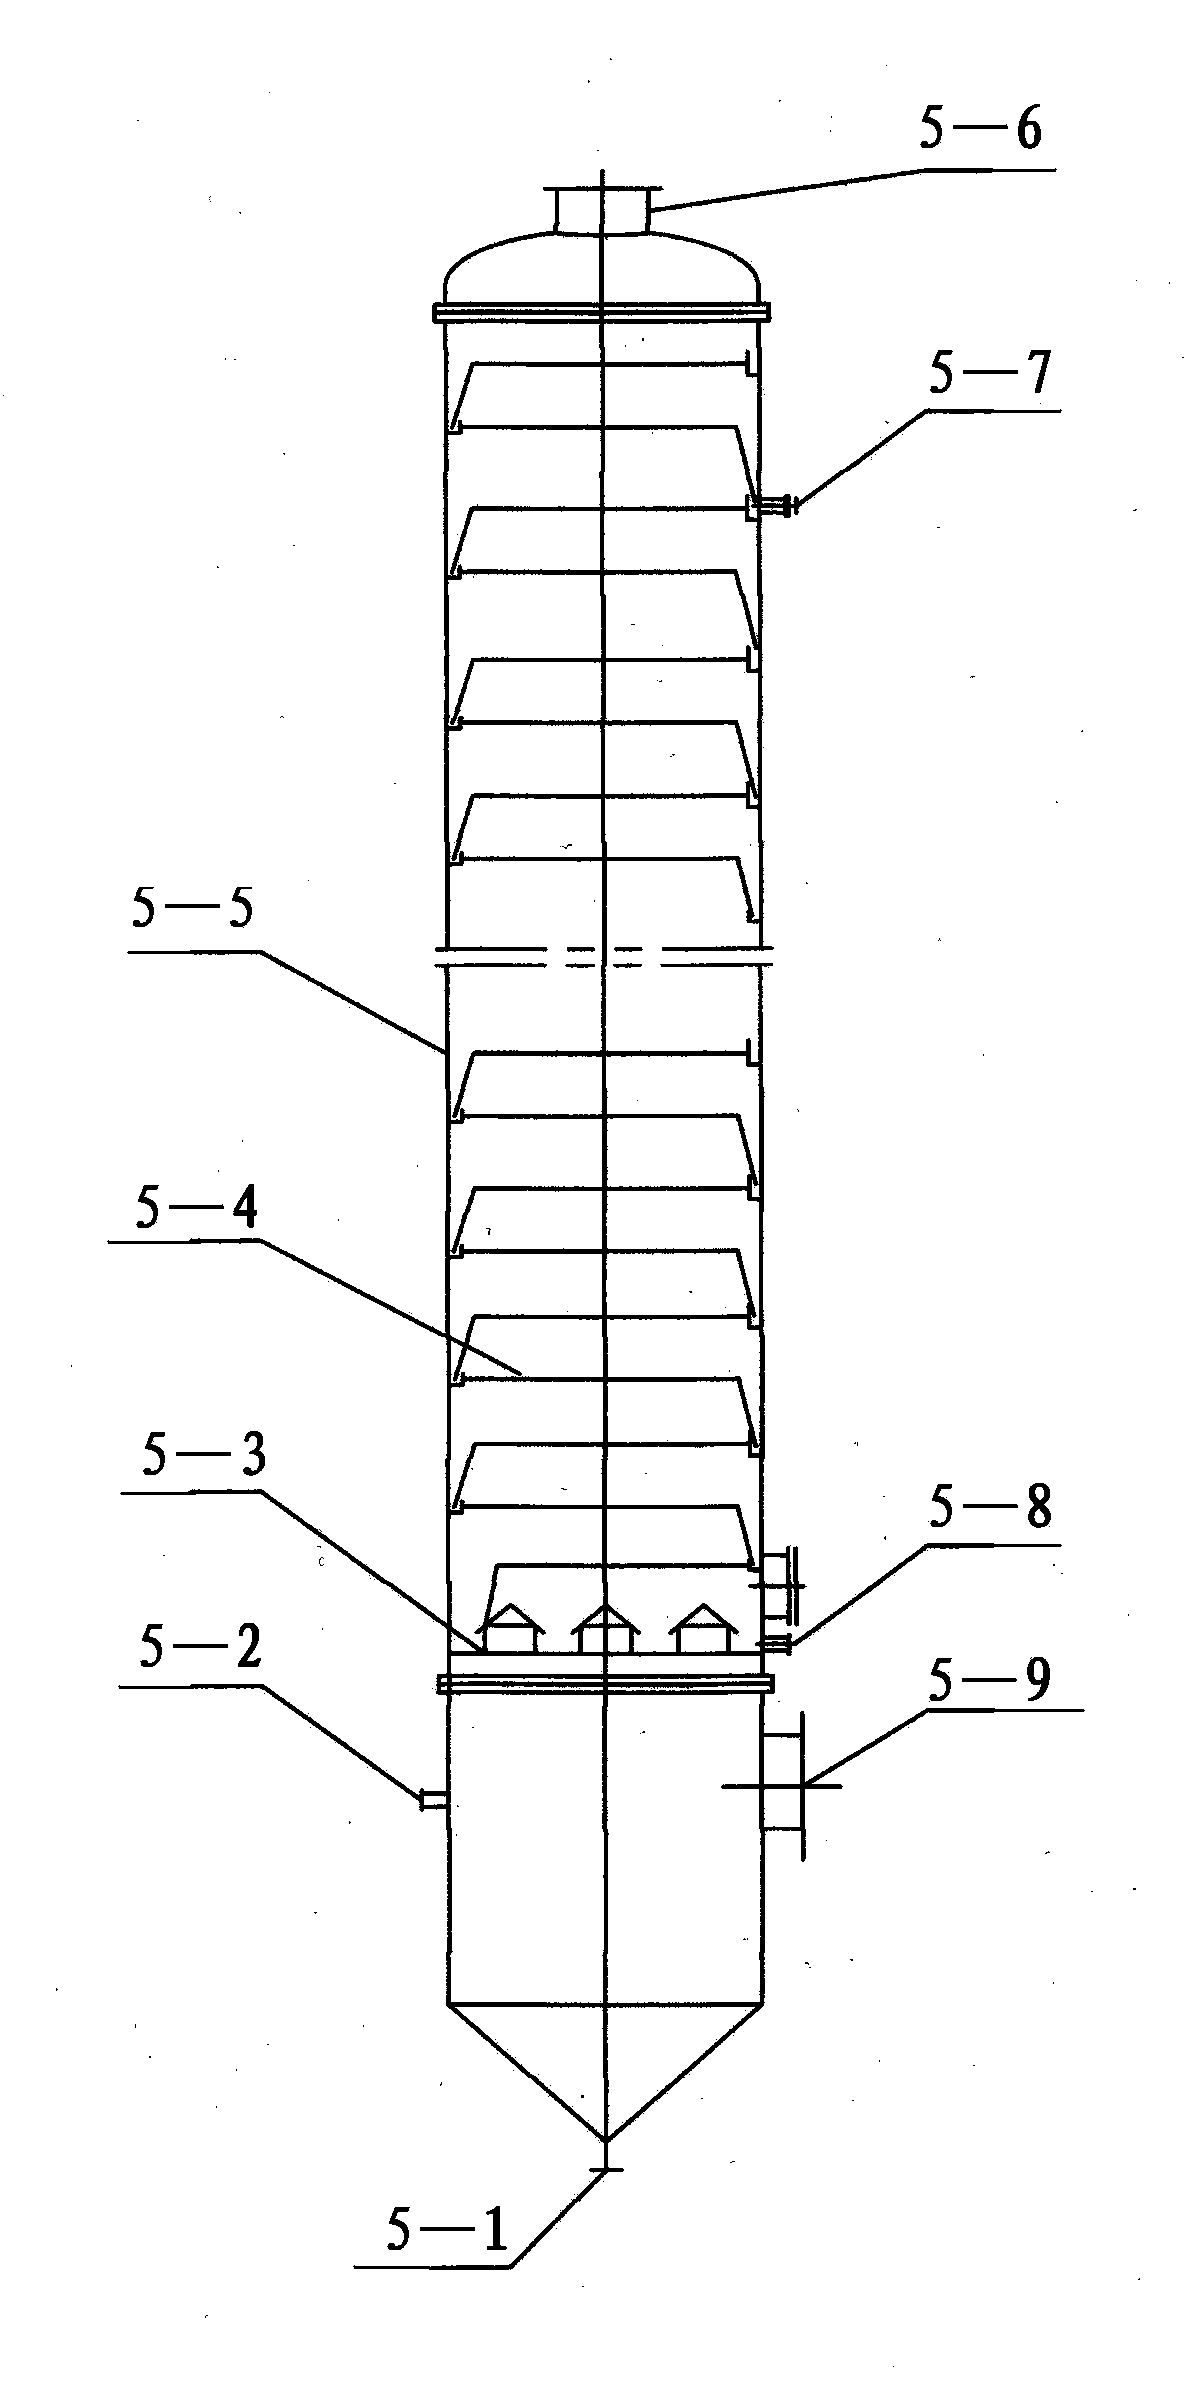 Method and equipment for production of adiponitrile from adipic acid